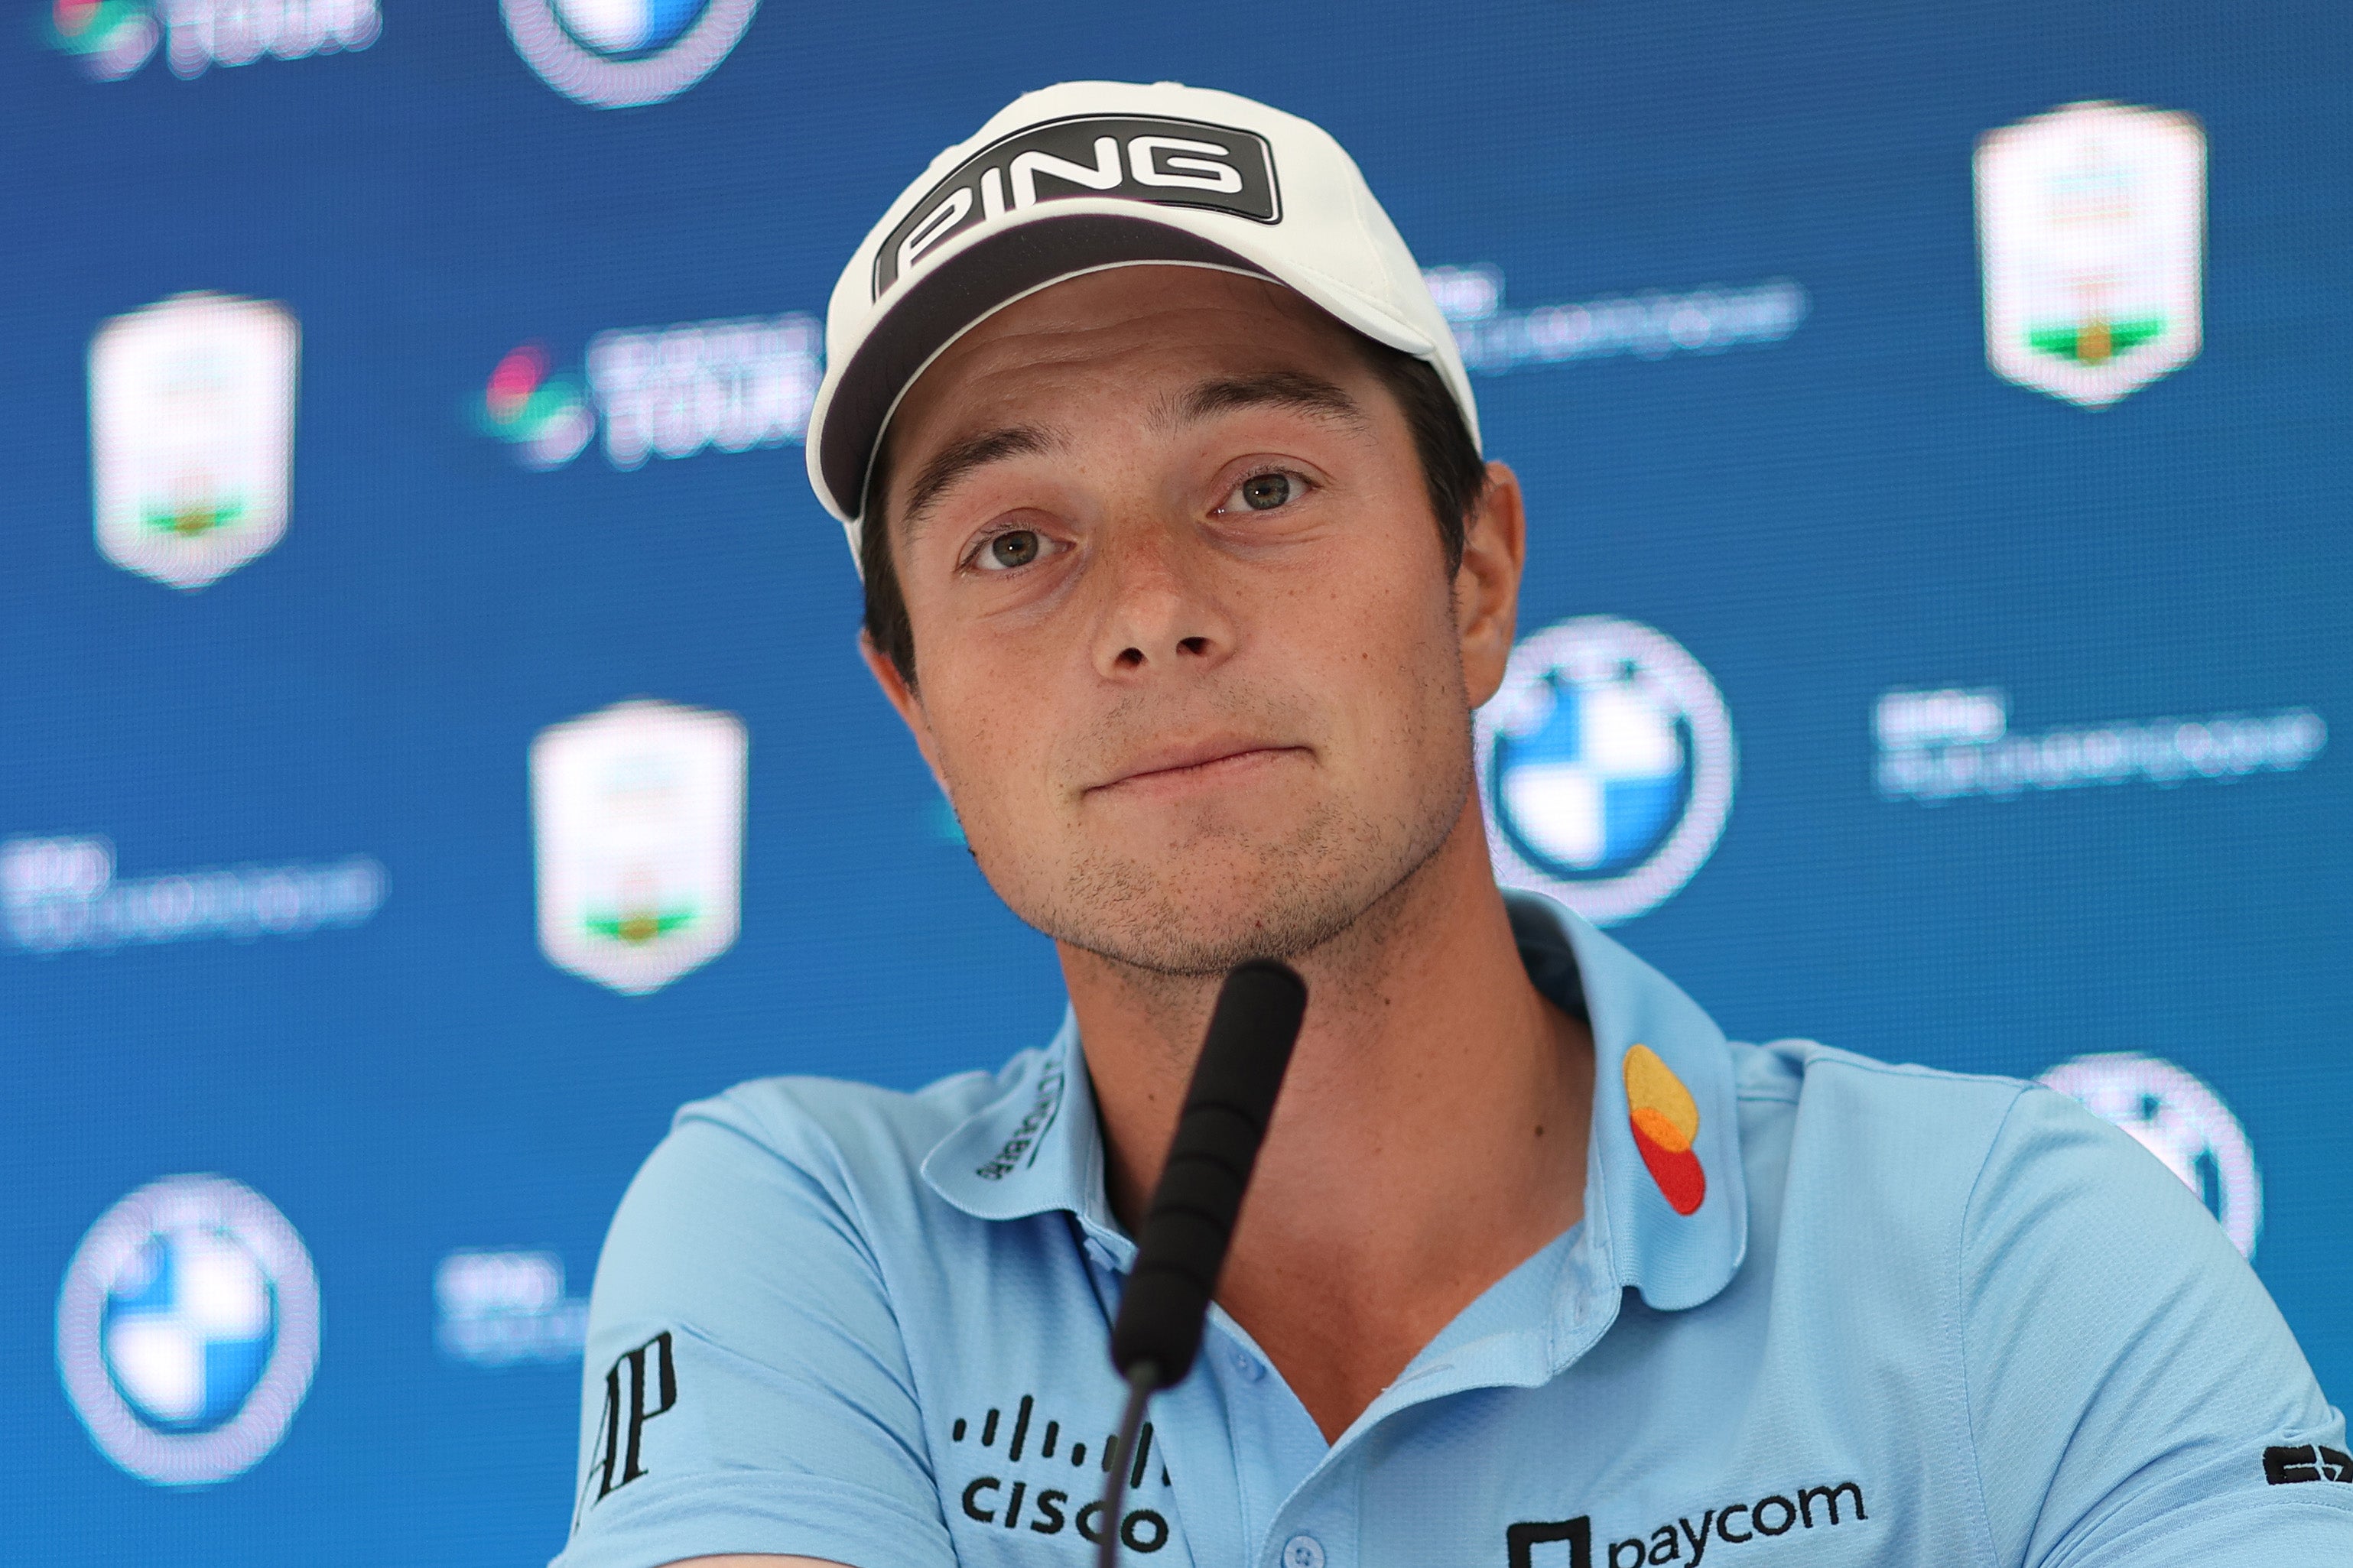 Viktor Hovland is in fine form after winning the FedEx Cup